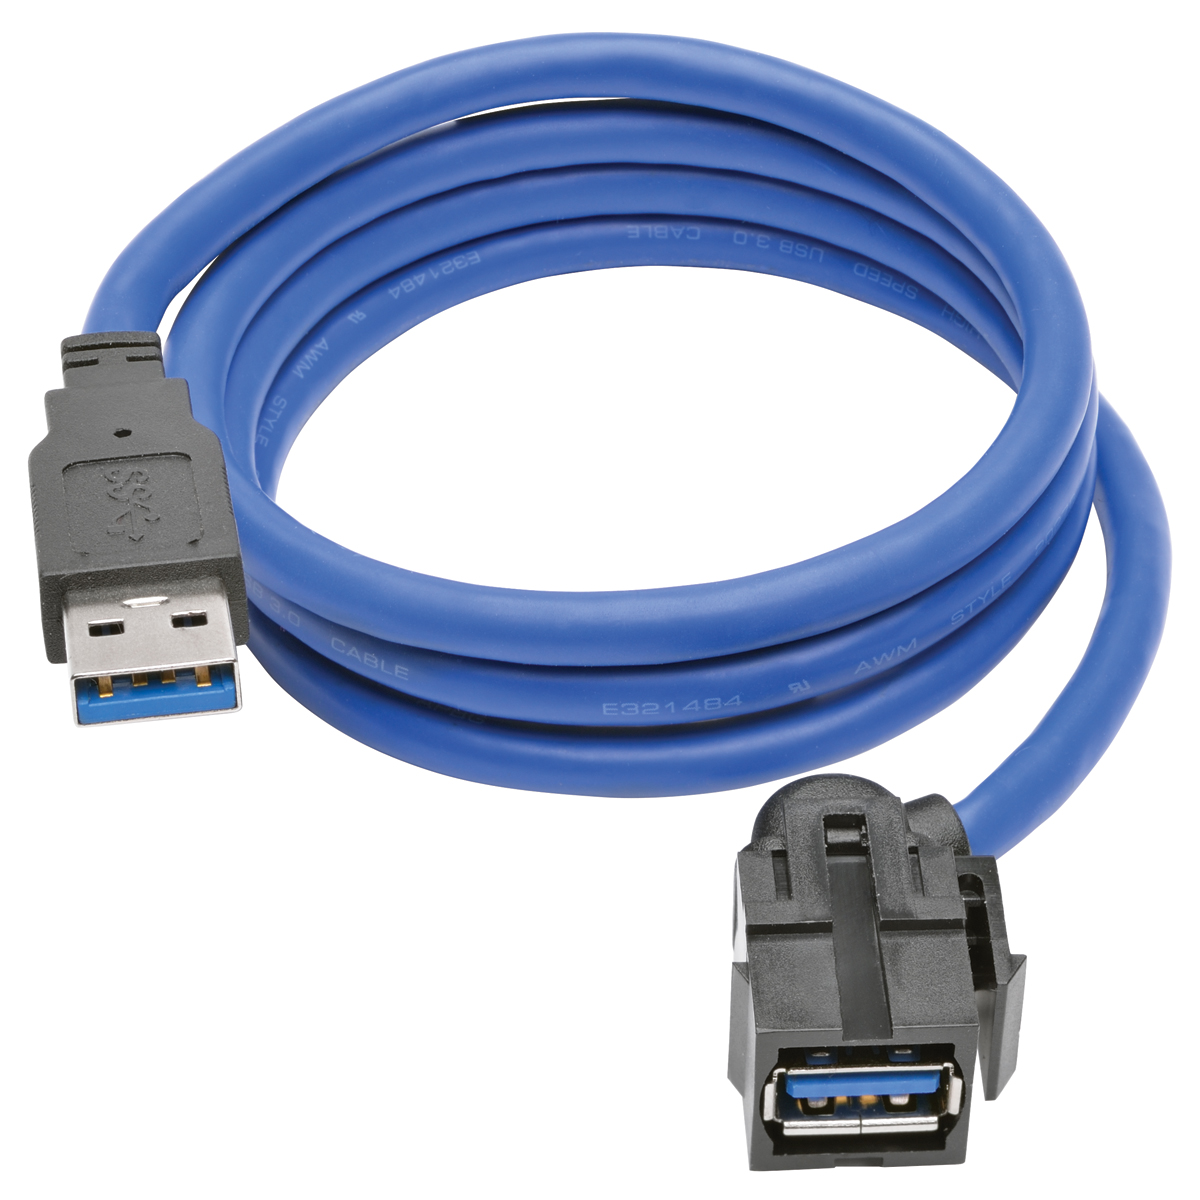 Super Speed USB 3.0 Active Extension Cable USB 3.0 Extender USB M-F Short 3FT 